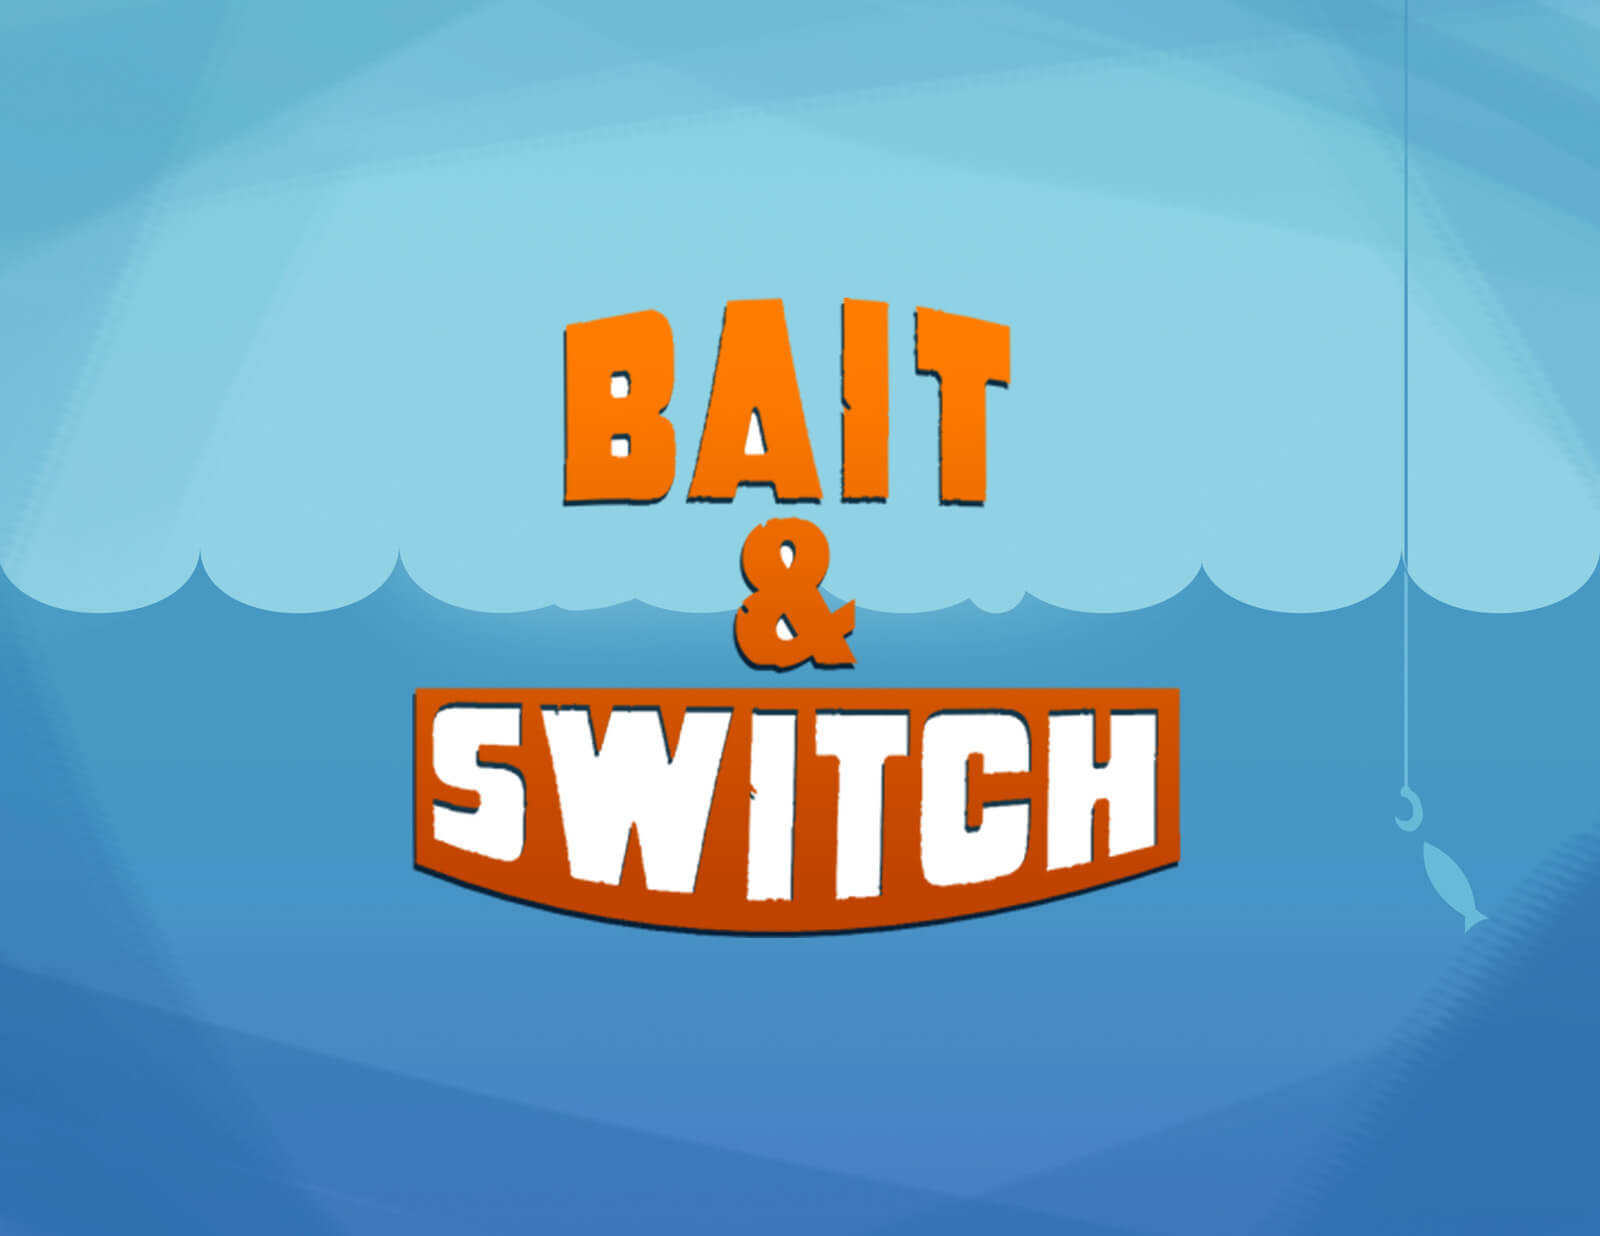 A title card reading "Bait &amp; Switch" in orange against a blue ocean background